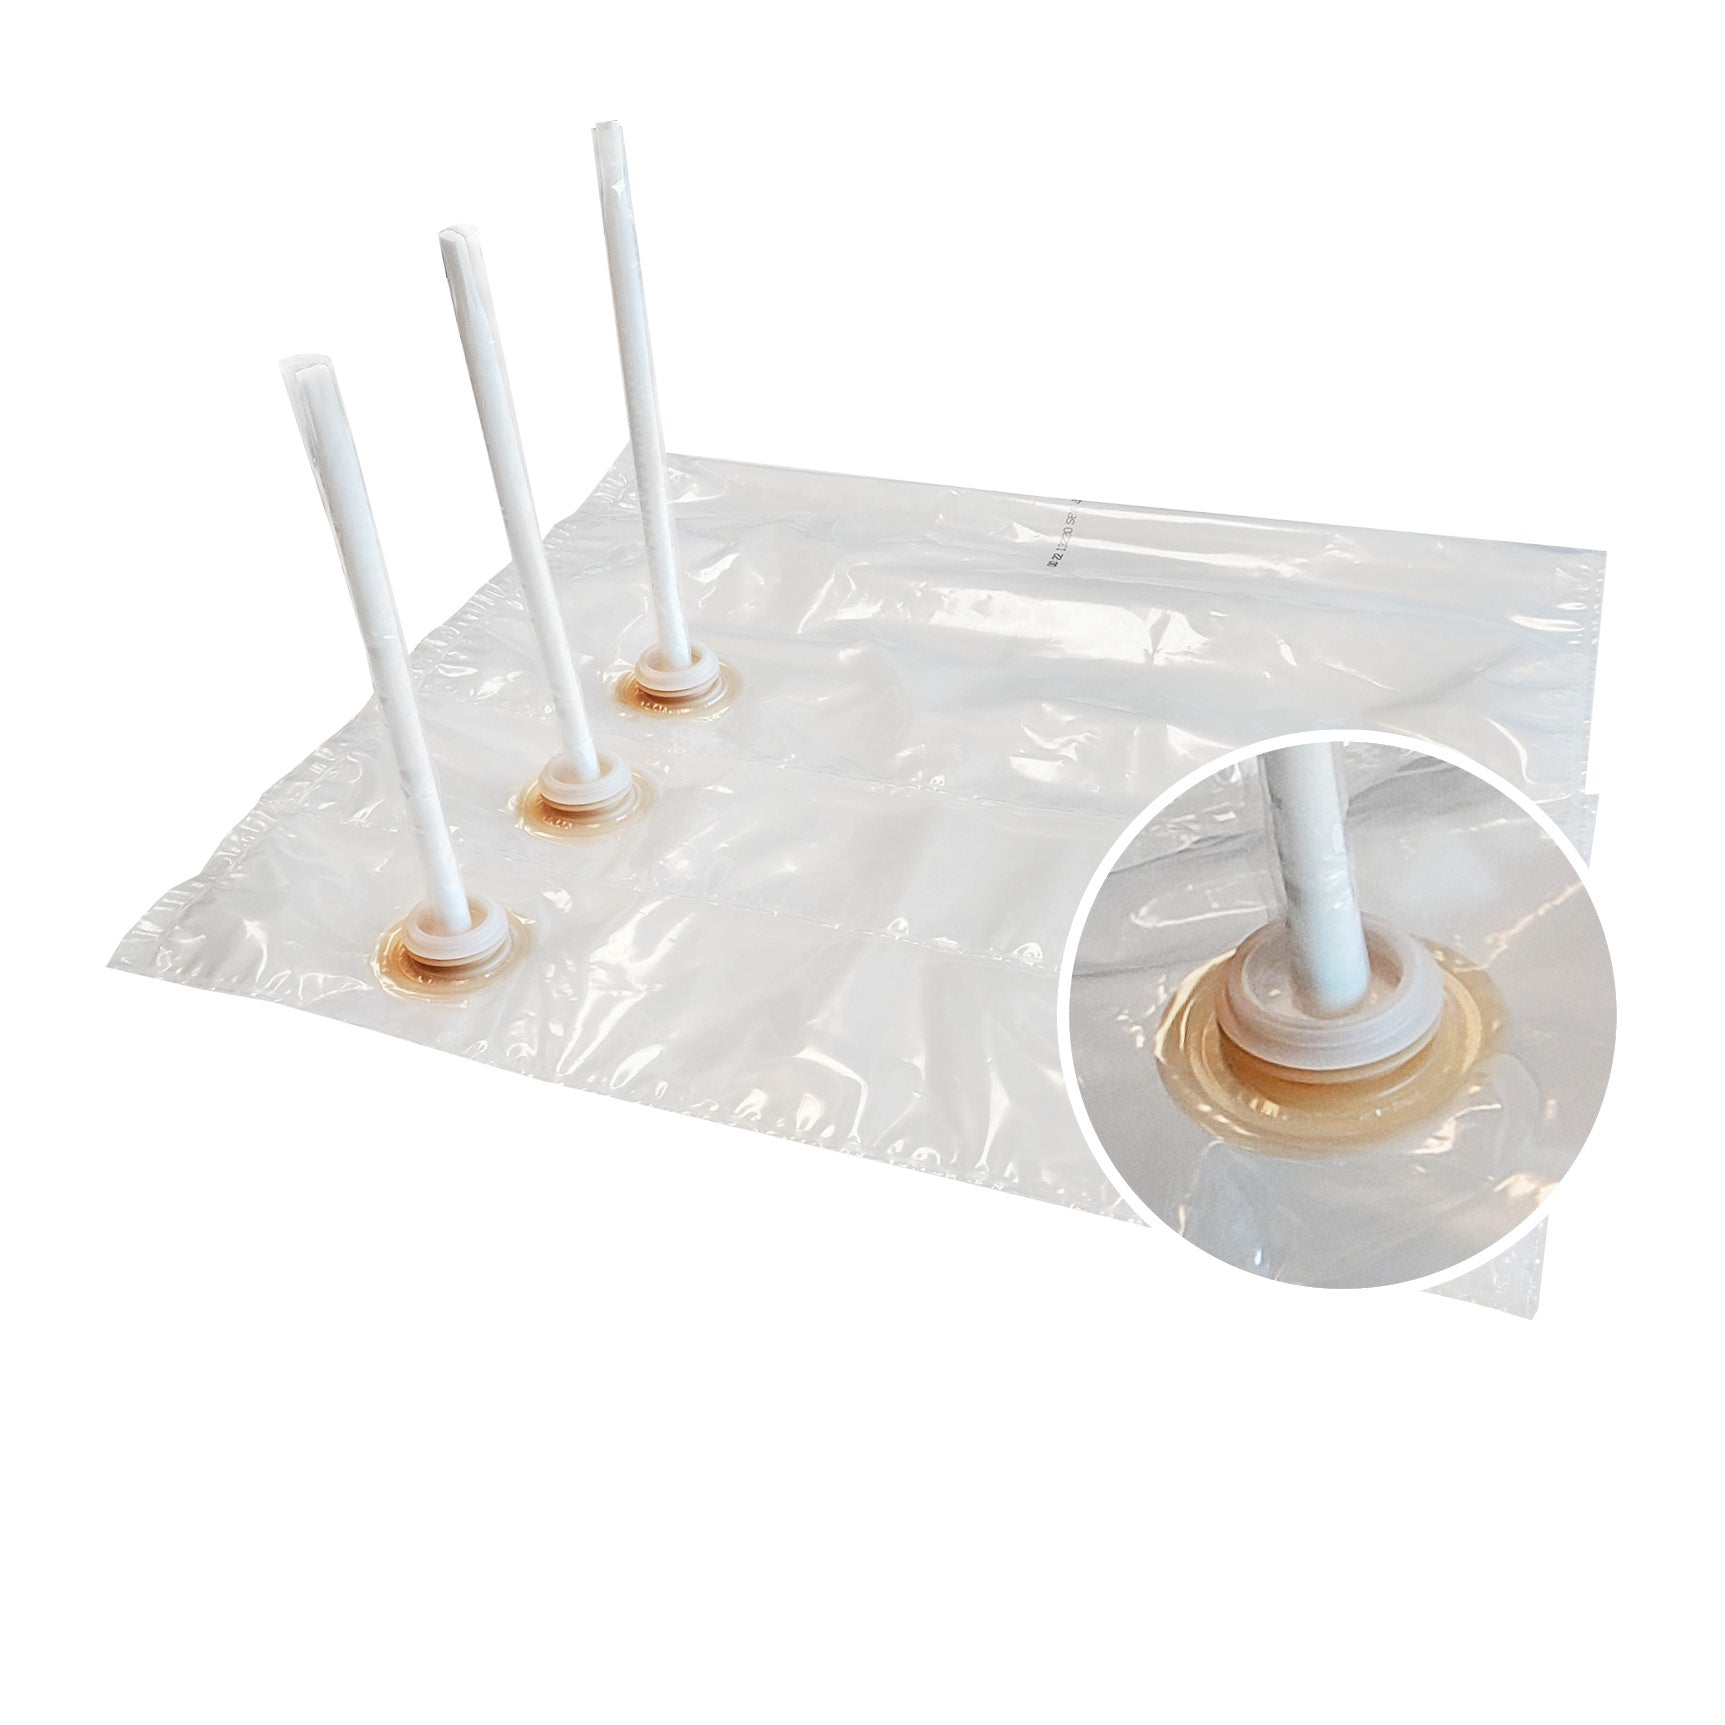 Liquibox 5G Bags with Tube Cap for Bag-in-box